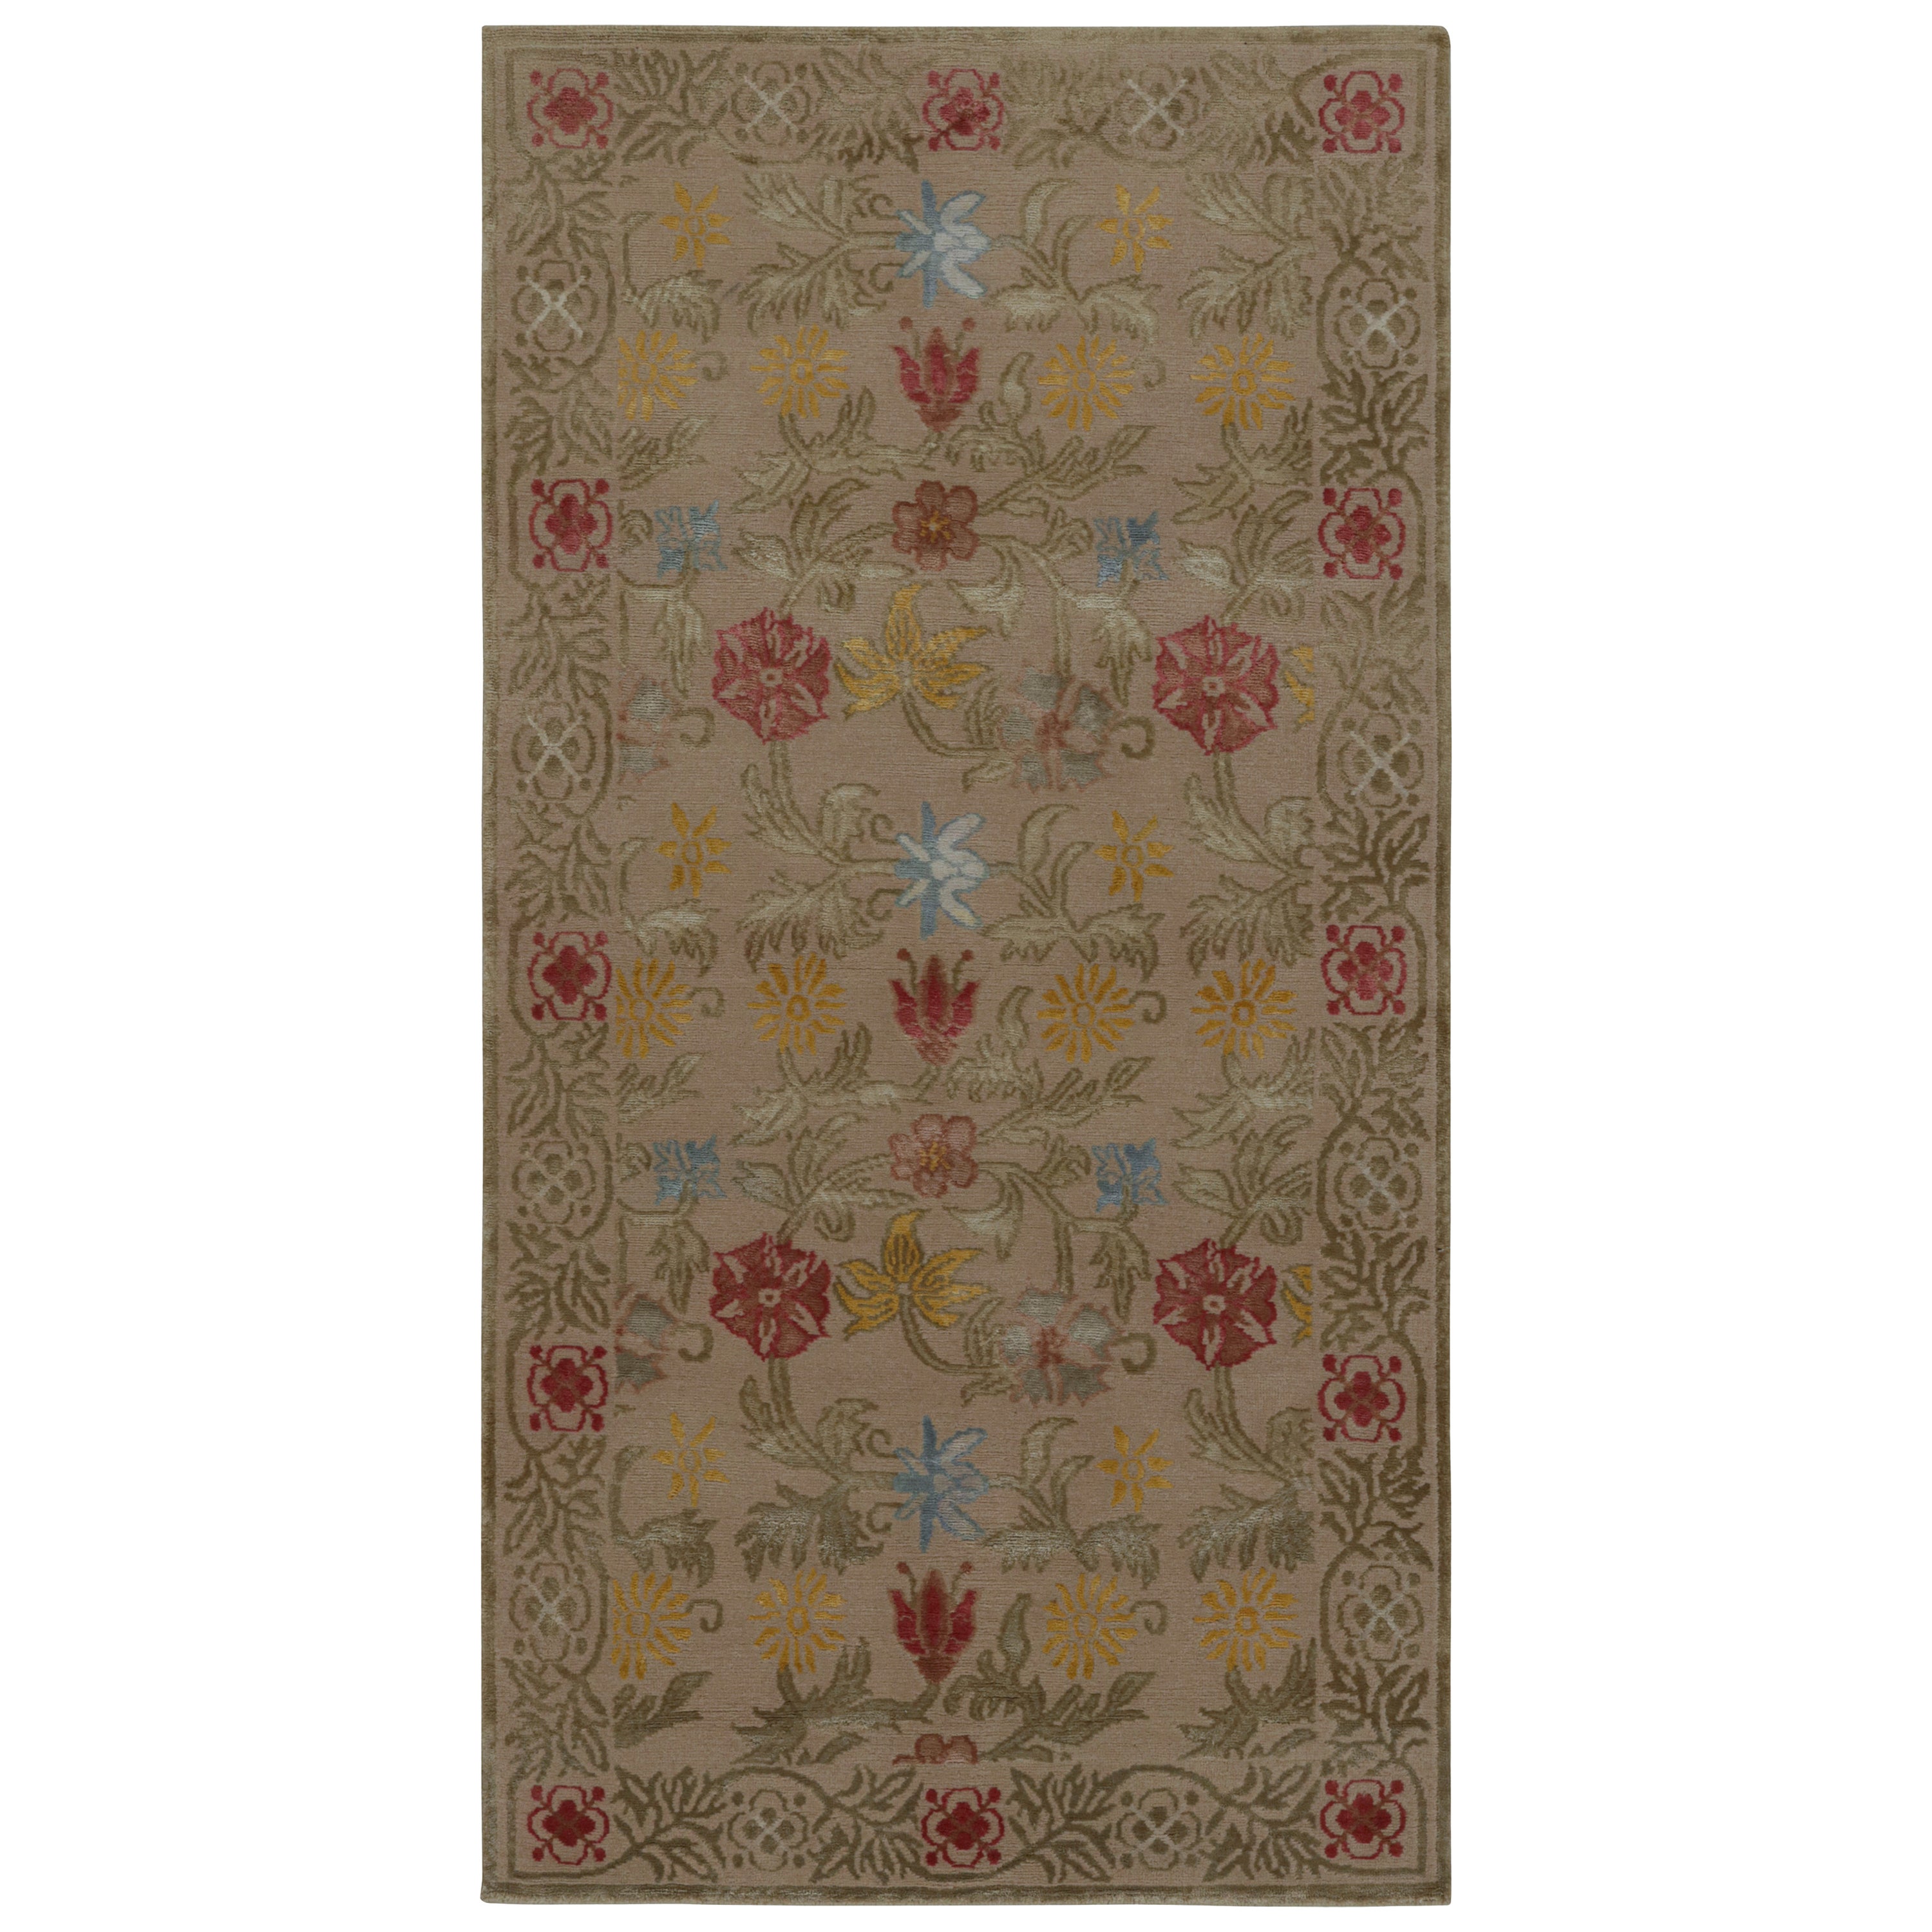 Rug & Kilim’s Spanish European Style Rug in Beige with Floral Patterns “Bilbao”